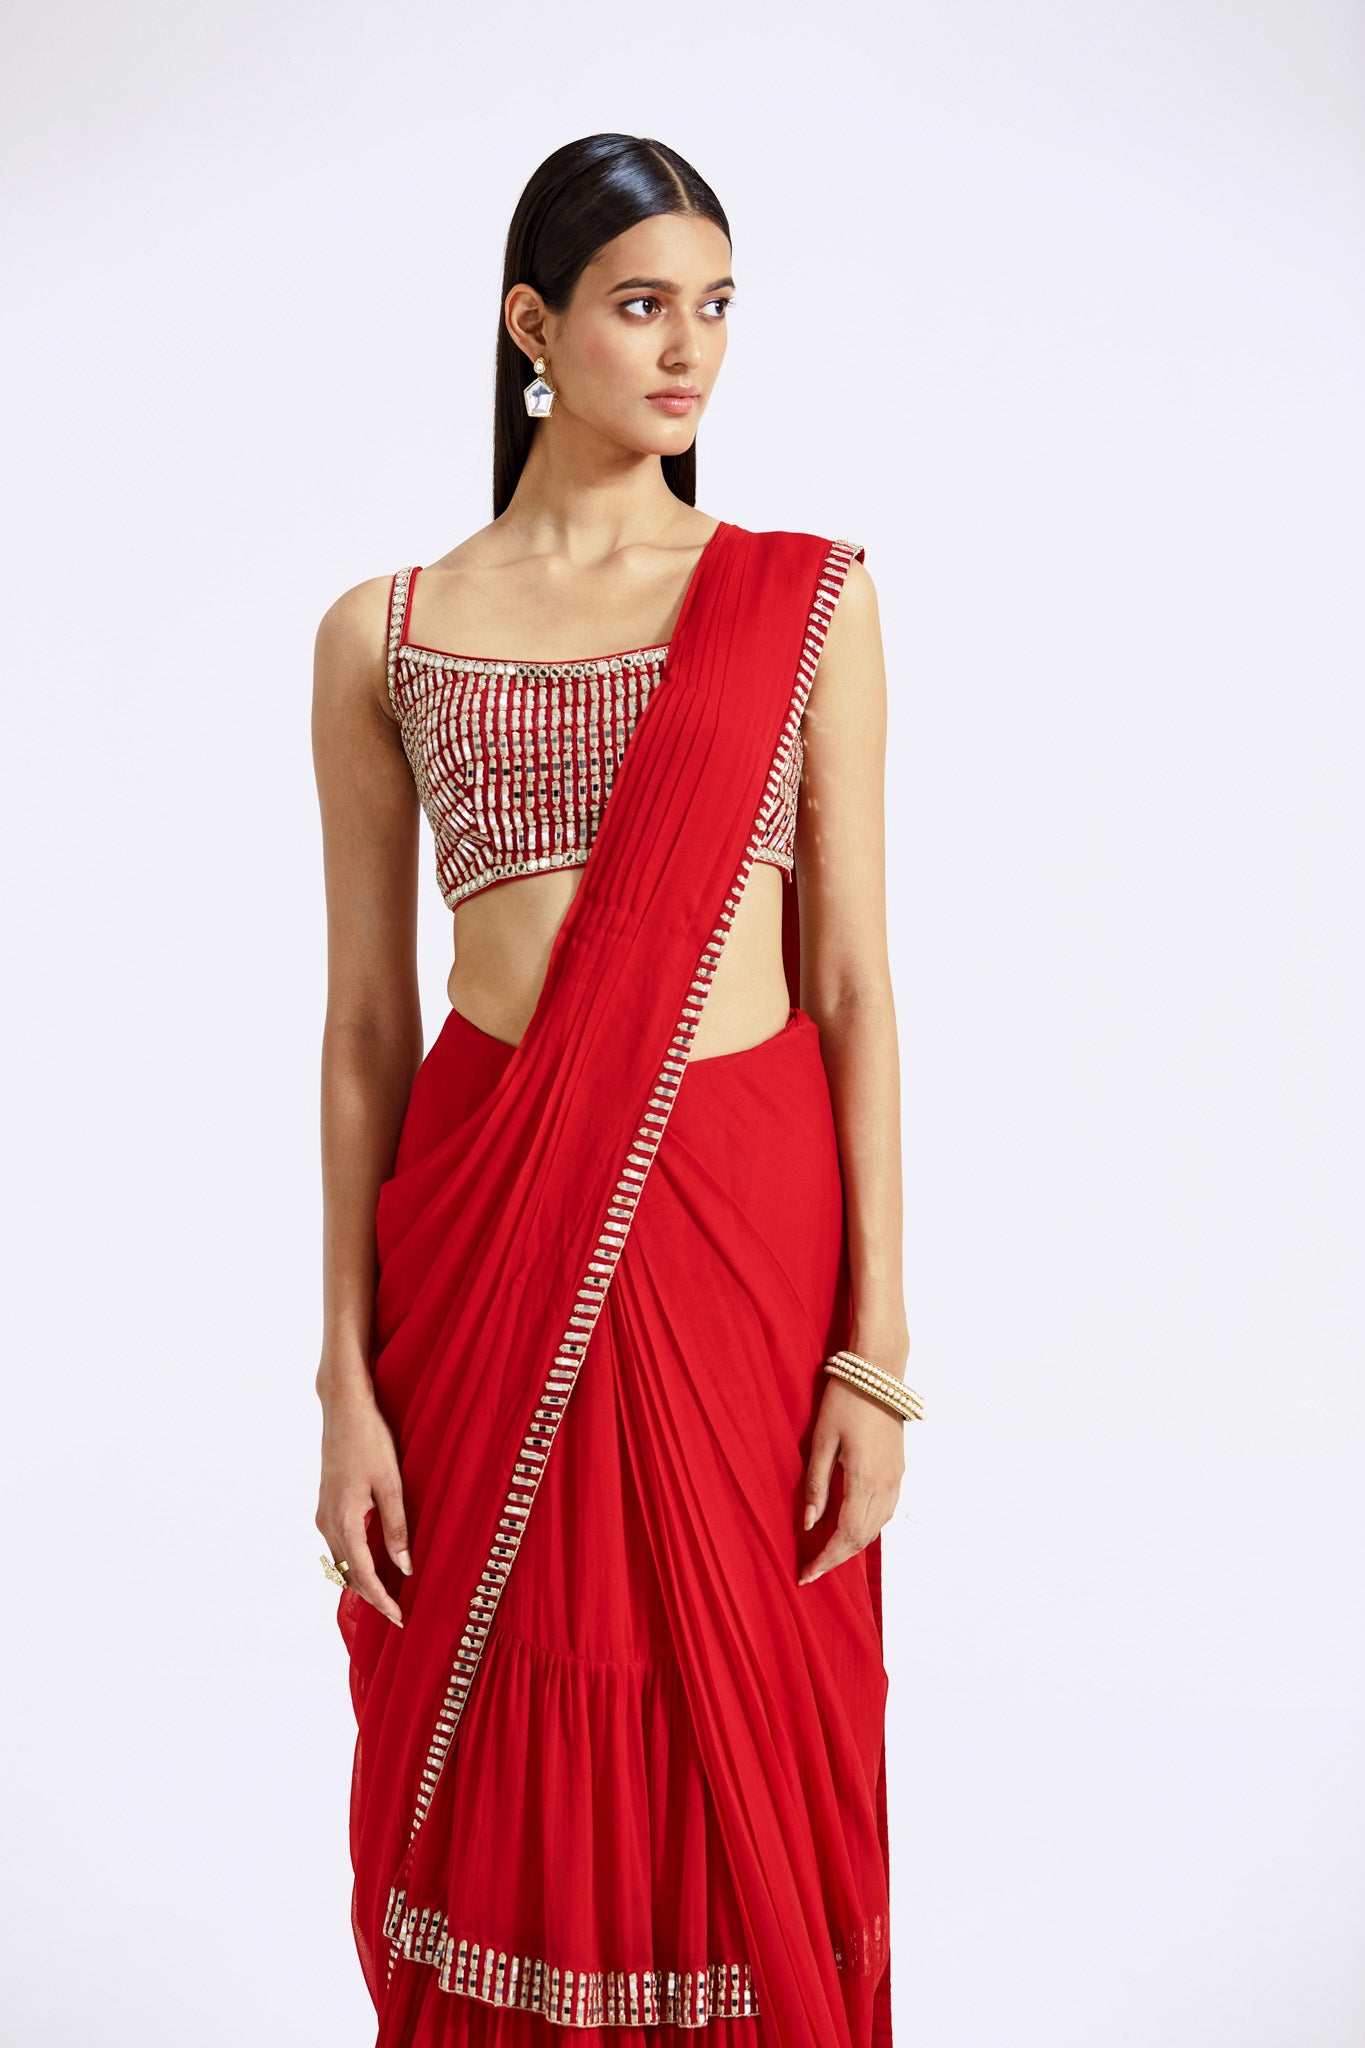 Buy red mirror work georgette pre-draped saree online in USA with embroidered blouse. Look your best at parties and weddings in beautiful designer sarees, embroidered sarees, handwoven sarees, silk sarees, organza saris from Pure Elegance Indian saree store in USA.-closeup